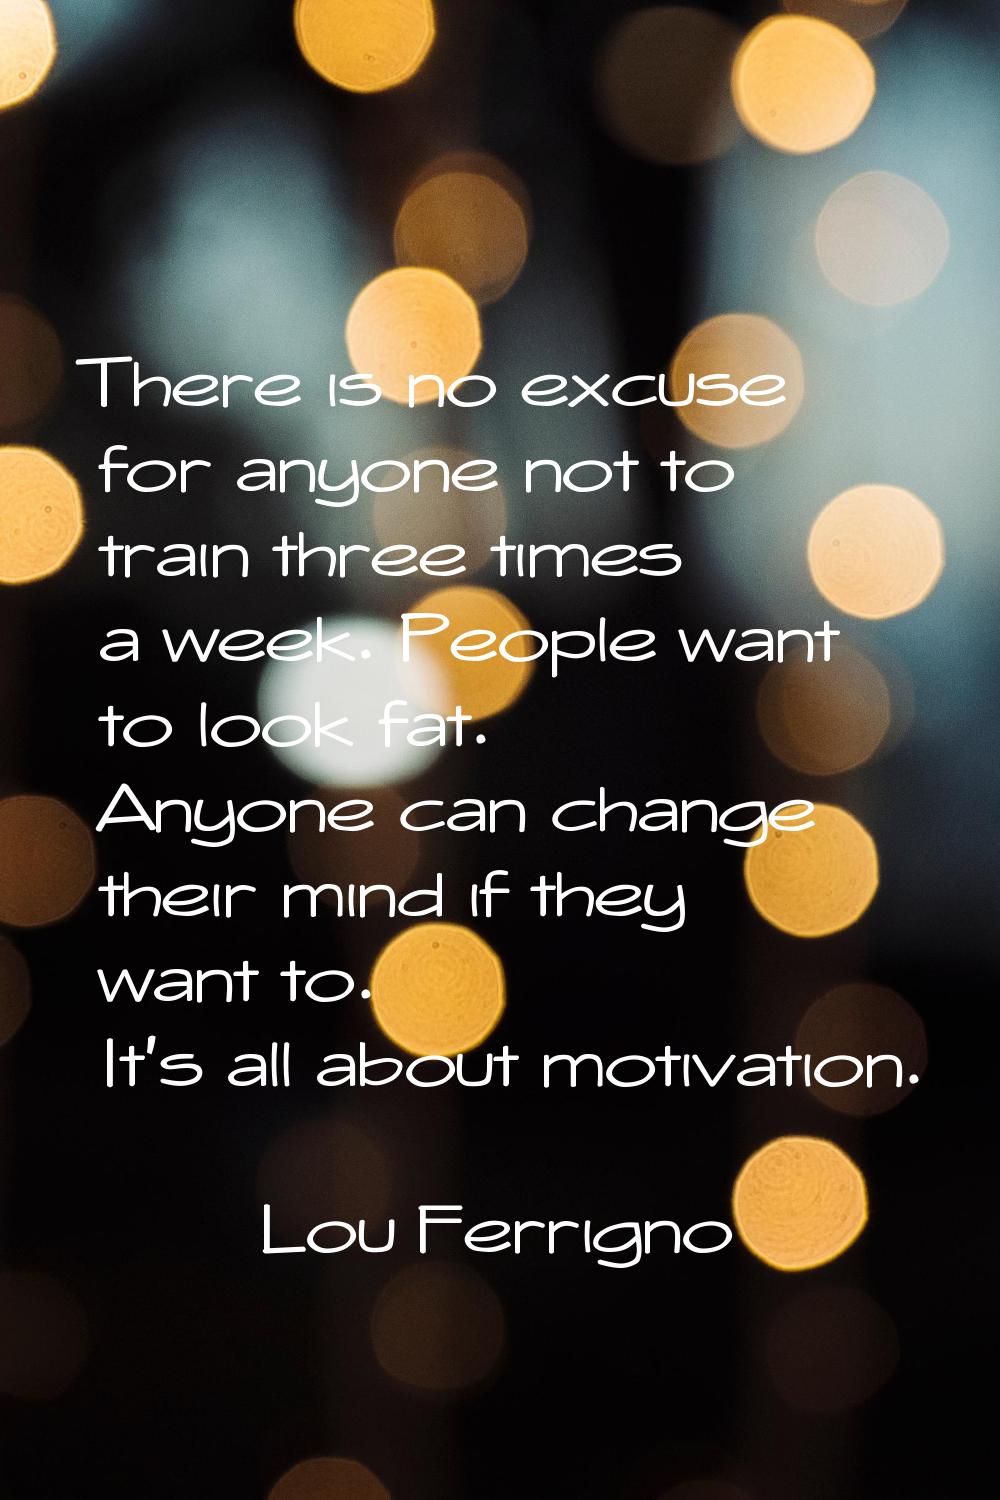 There is no excuse for anyone not to train three times a week. People want to look fat. Anyone can 